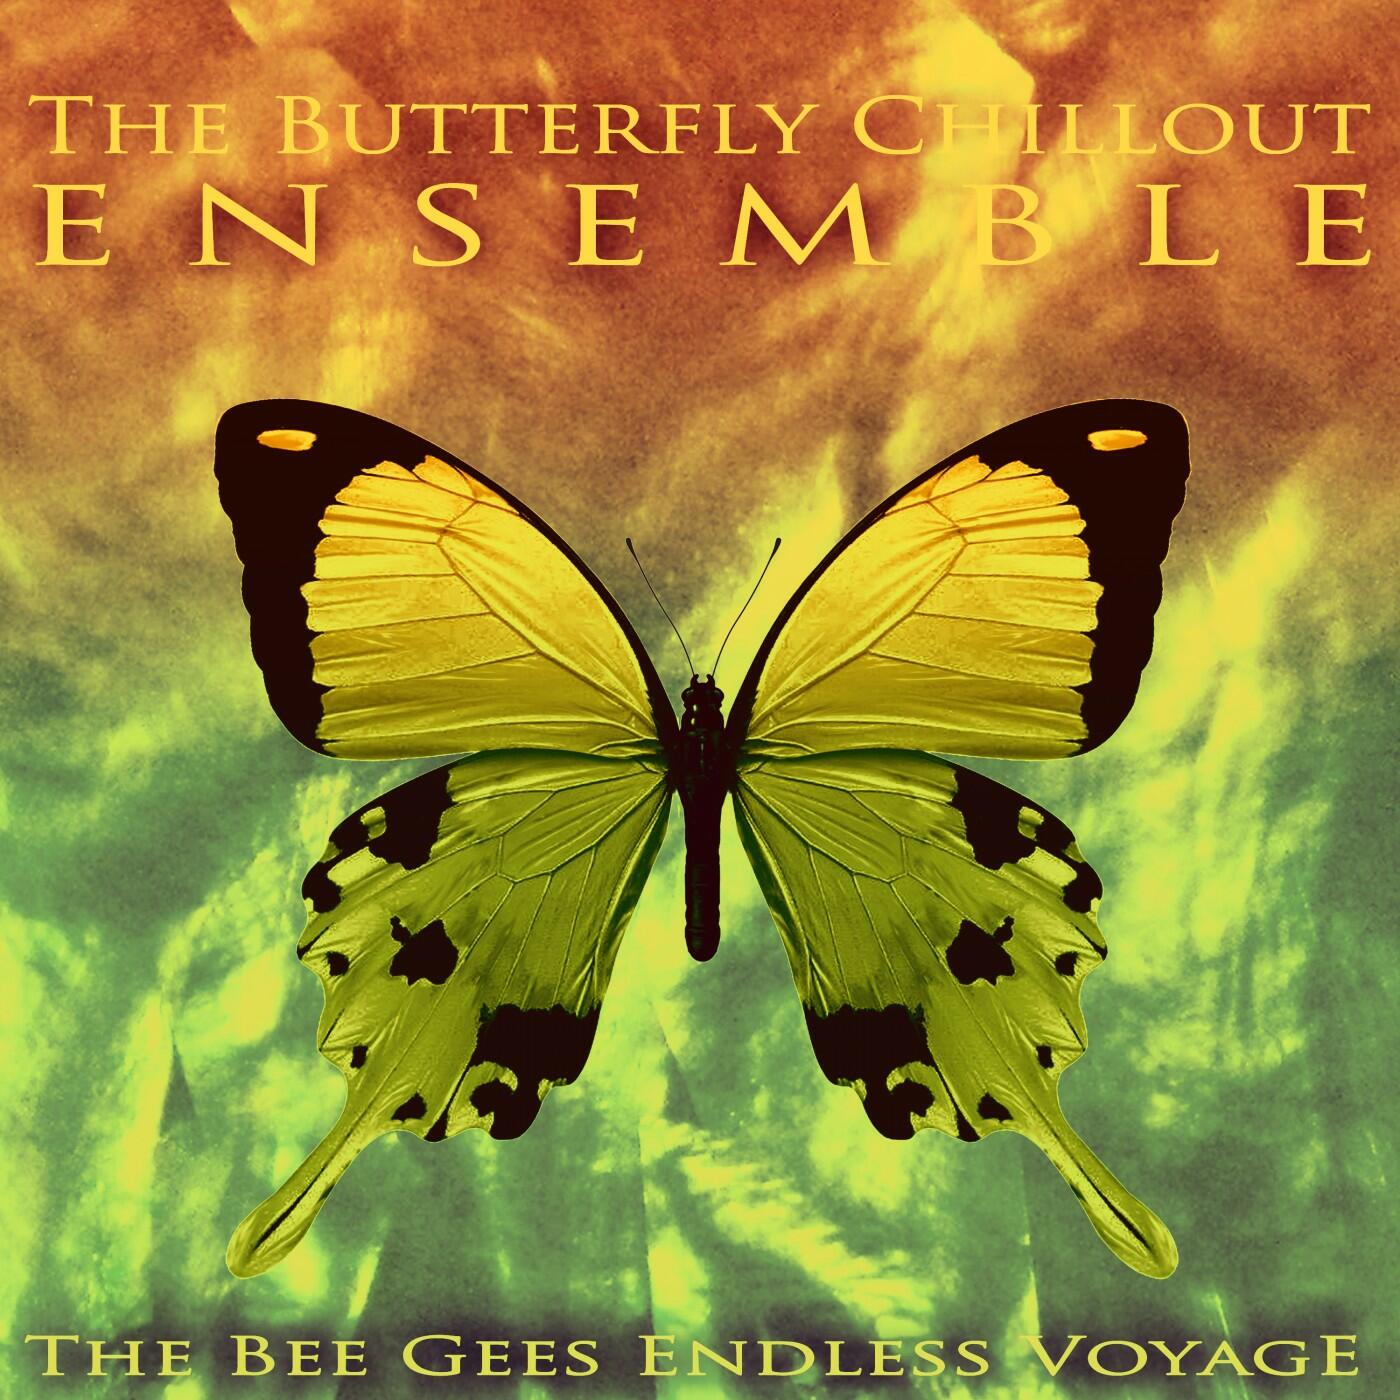 The Butterfly Chillout Ensemble - The Bee Gees Endless Voyage | iHeart